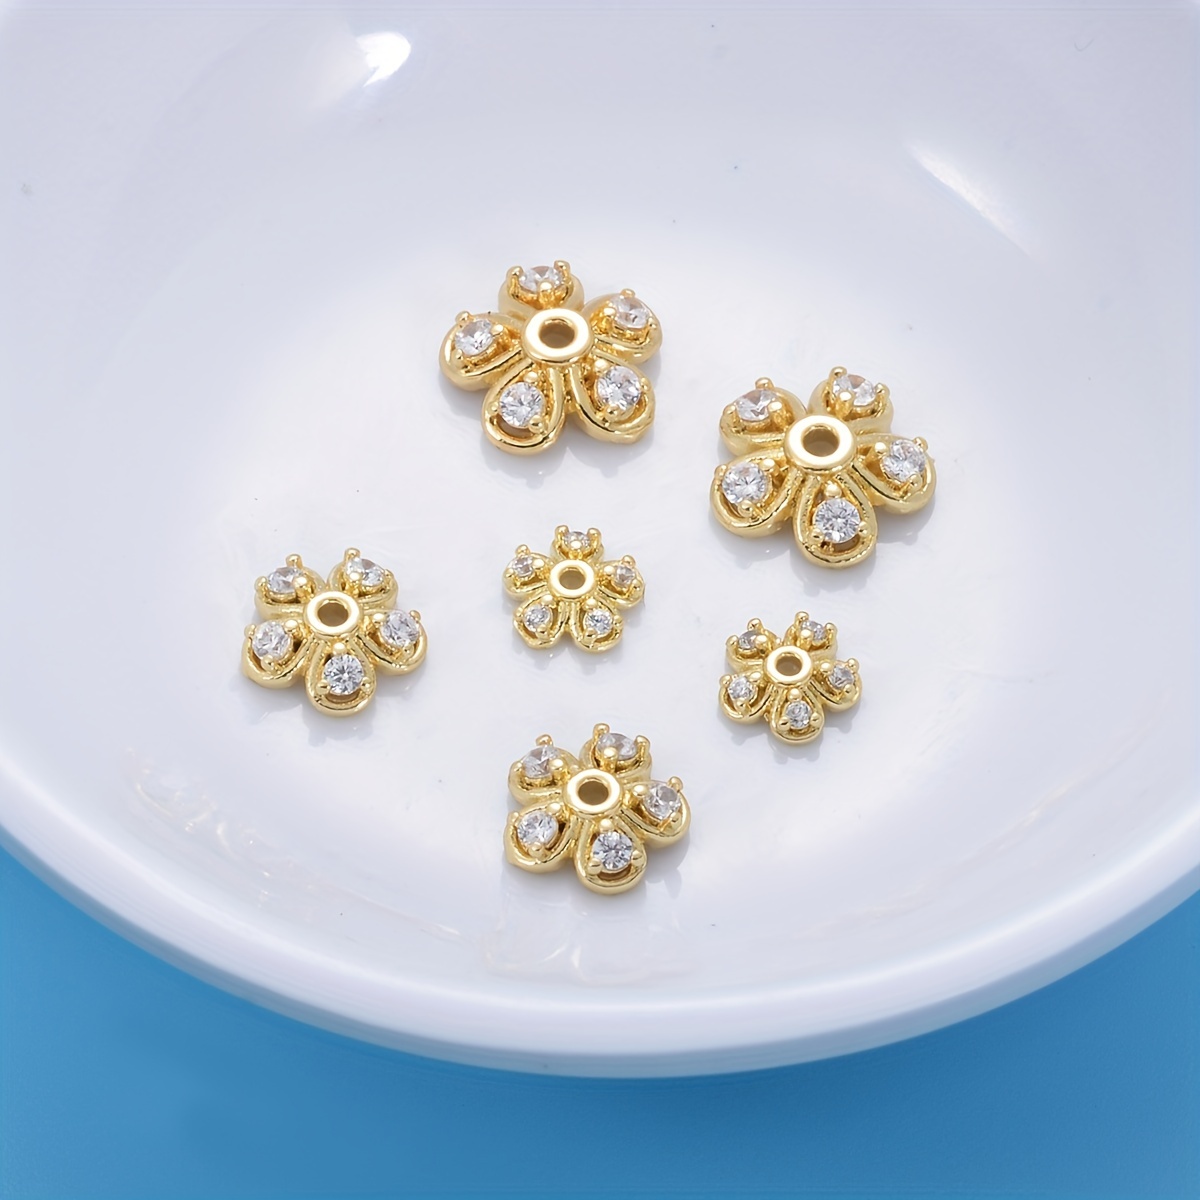 500PCS 15mm Gold Tone Flower Bead Caps Hollow Flower Bead Caps for Jewelry  Making (Gold)